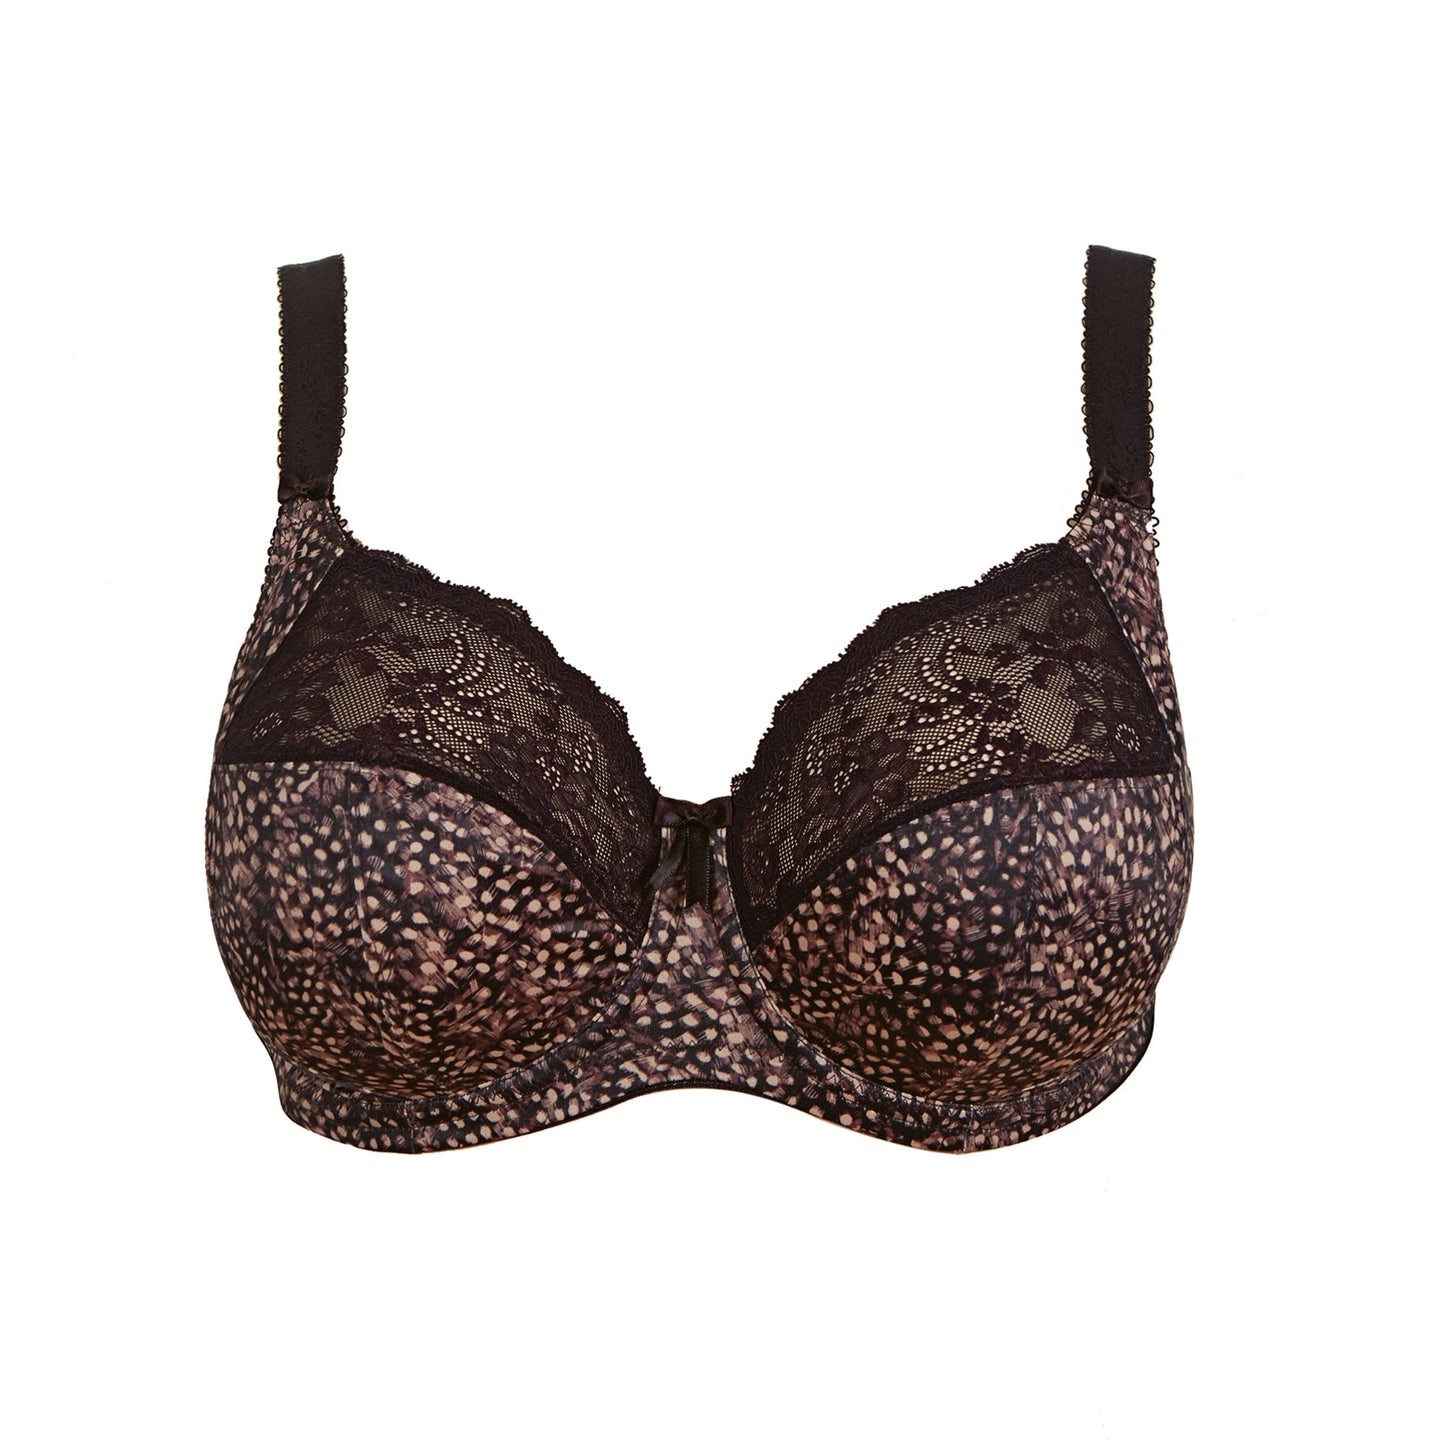 Pretty Things Elomi Morgan Full Cup Support Black Bra - Underwear Specialists